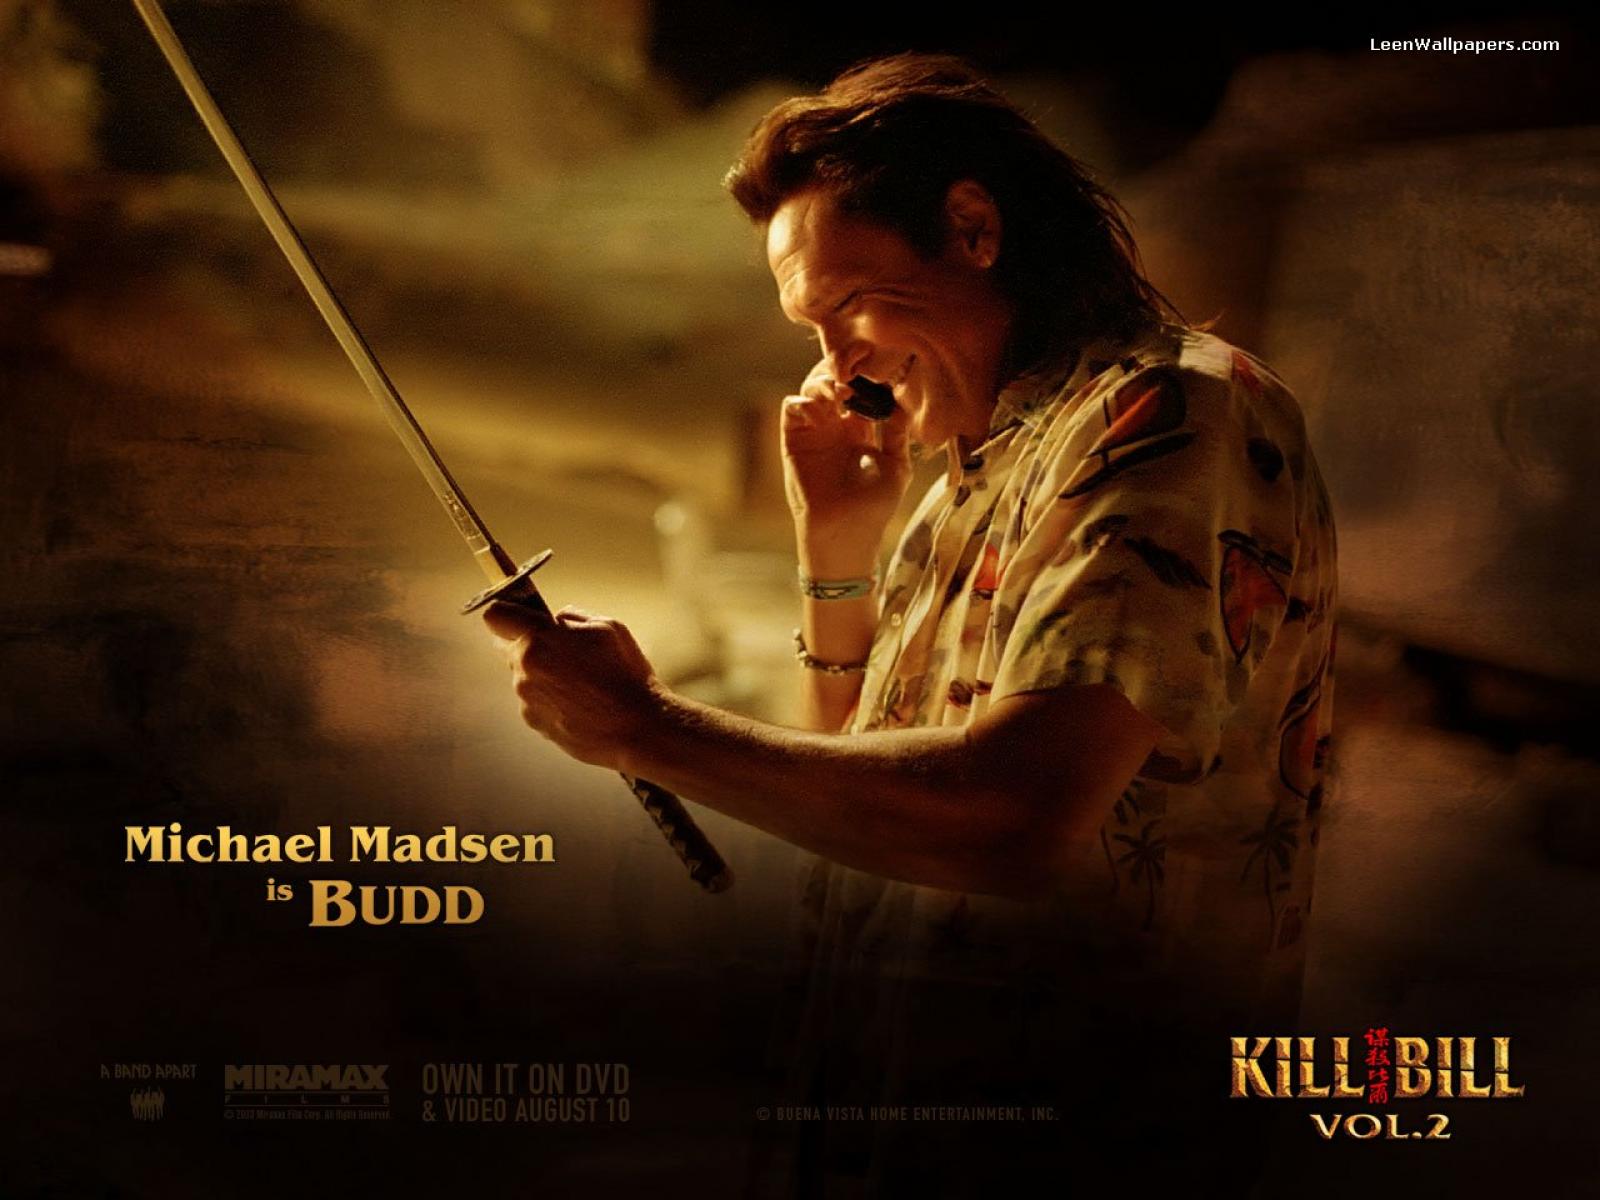 HD wallpaper featuring Michael Madsen as Budd from Kill Bill: Vol. 2, with a sword, against a dimly lit backdrop.